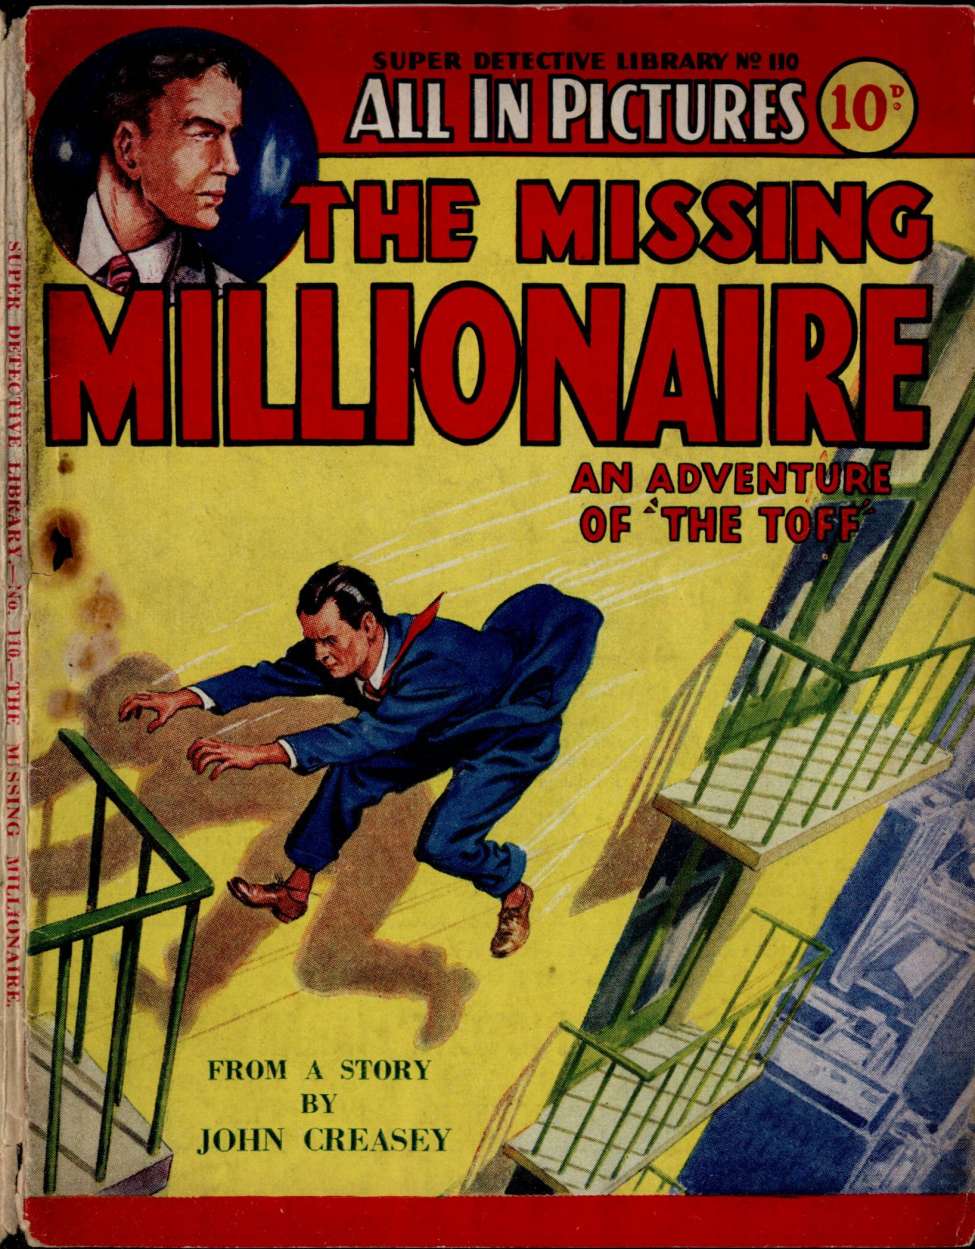 Book Cover For Super Detective Library 110 - The Missing Millionaire